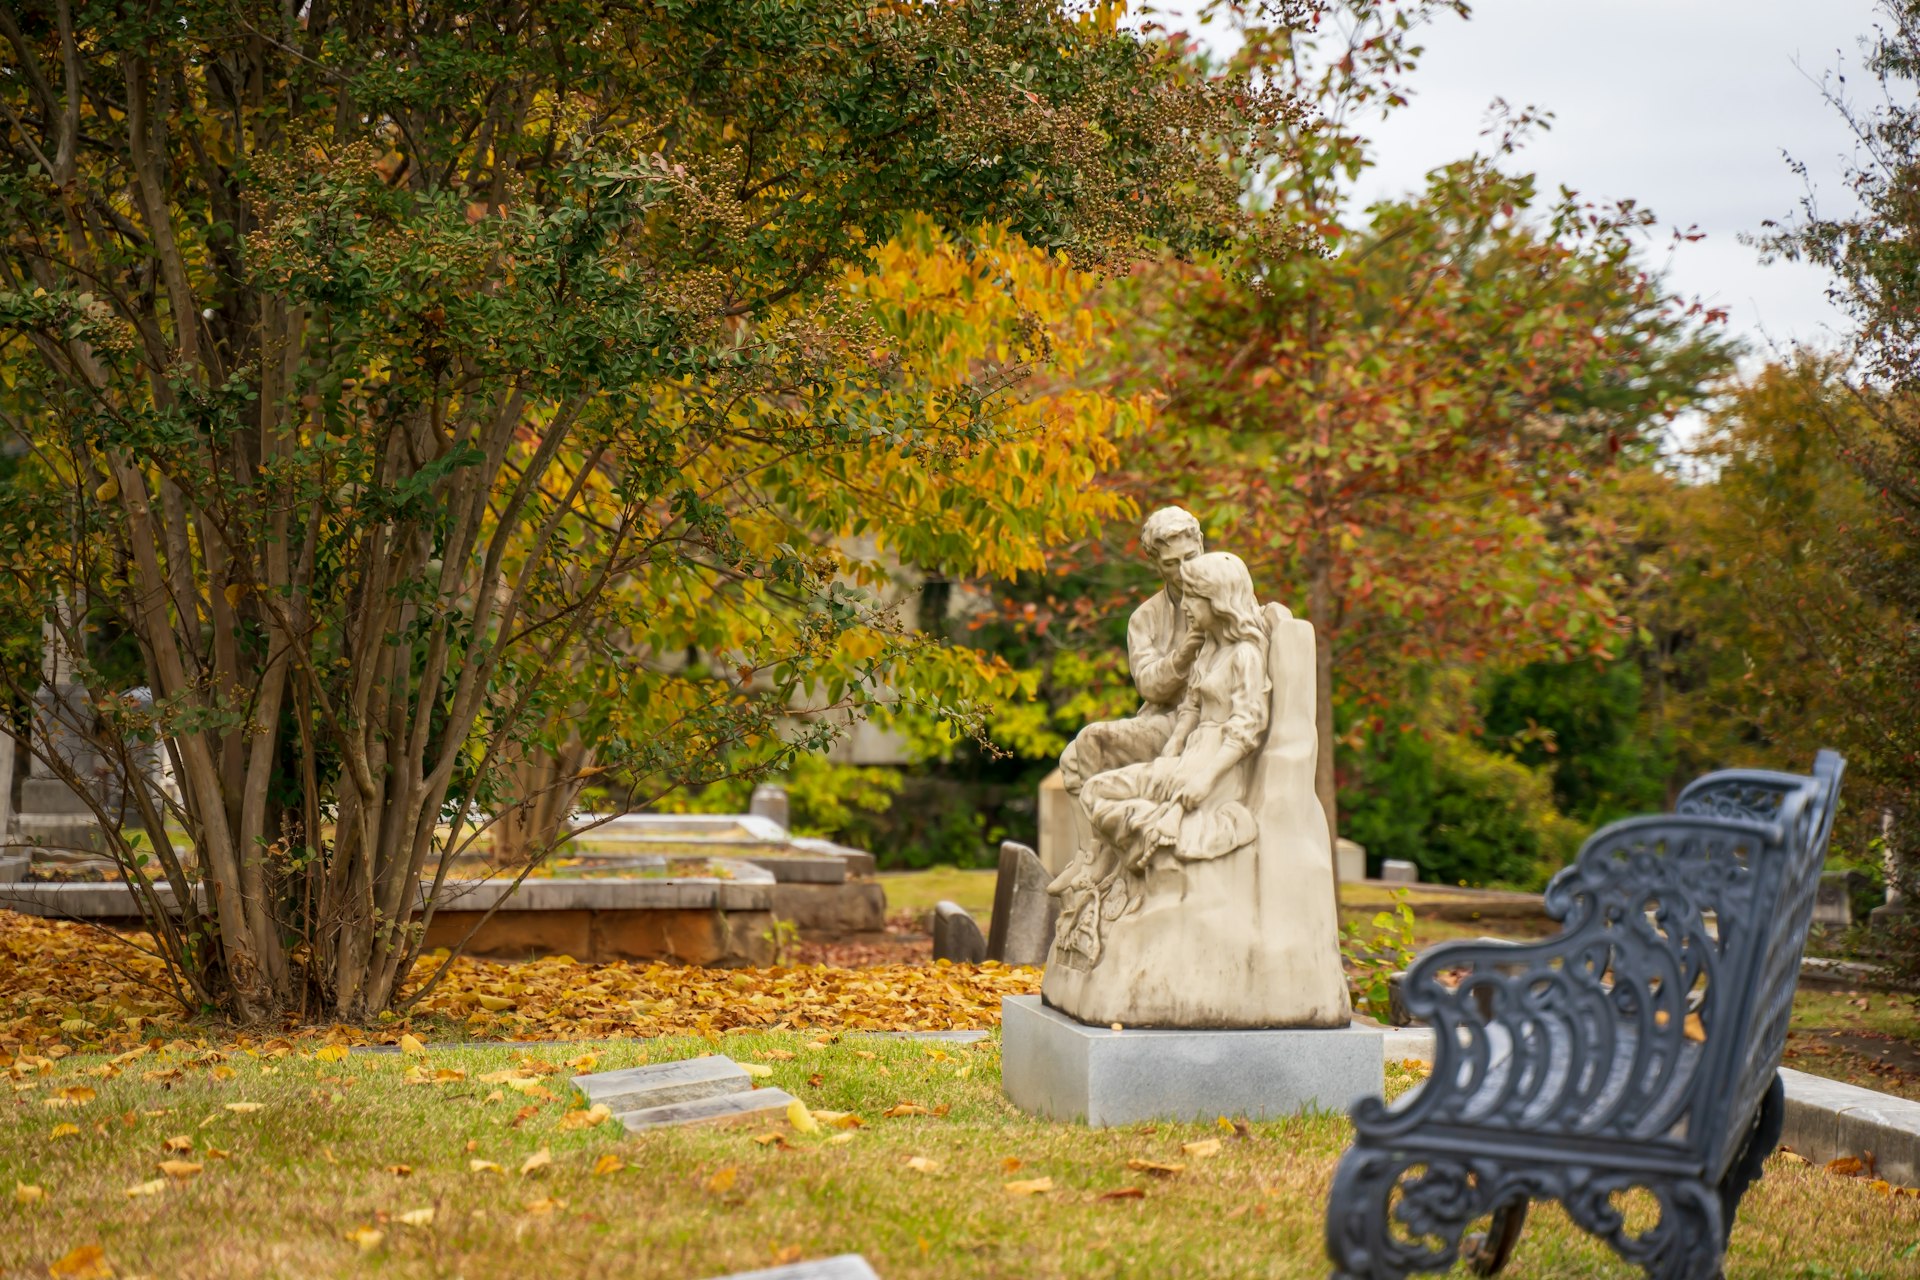 Historic grave markers and trees in fall foliage at Oakland Cemetery, East Side, Atlanta, Georgia, USA